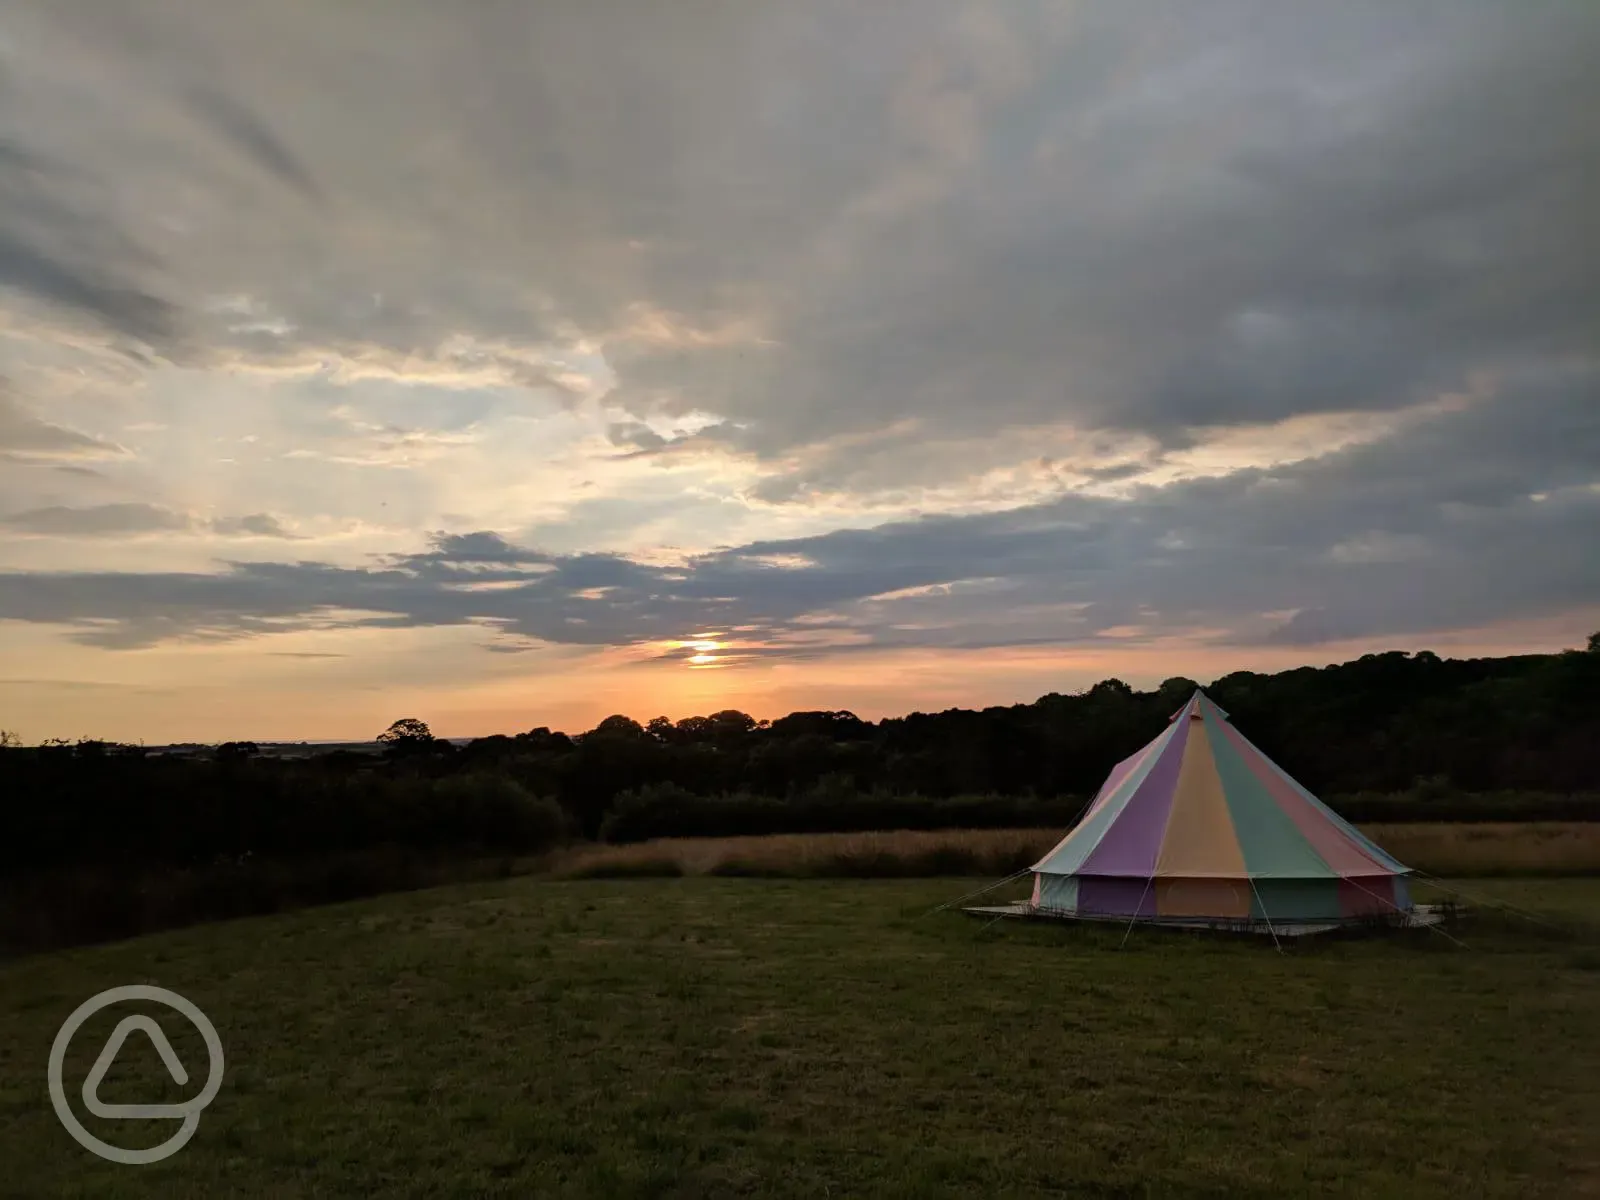 Sunset over the bell tent